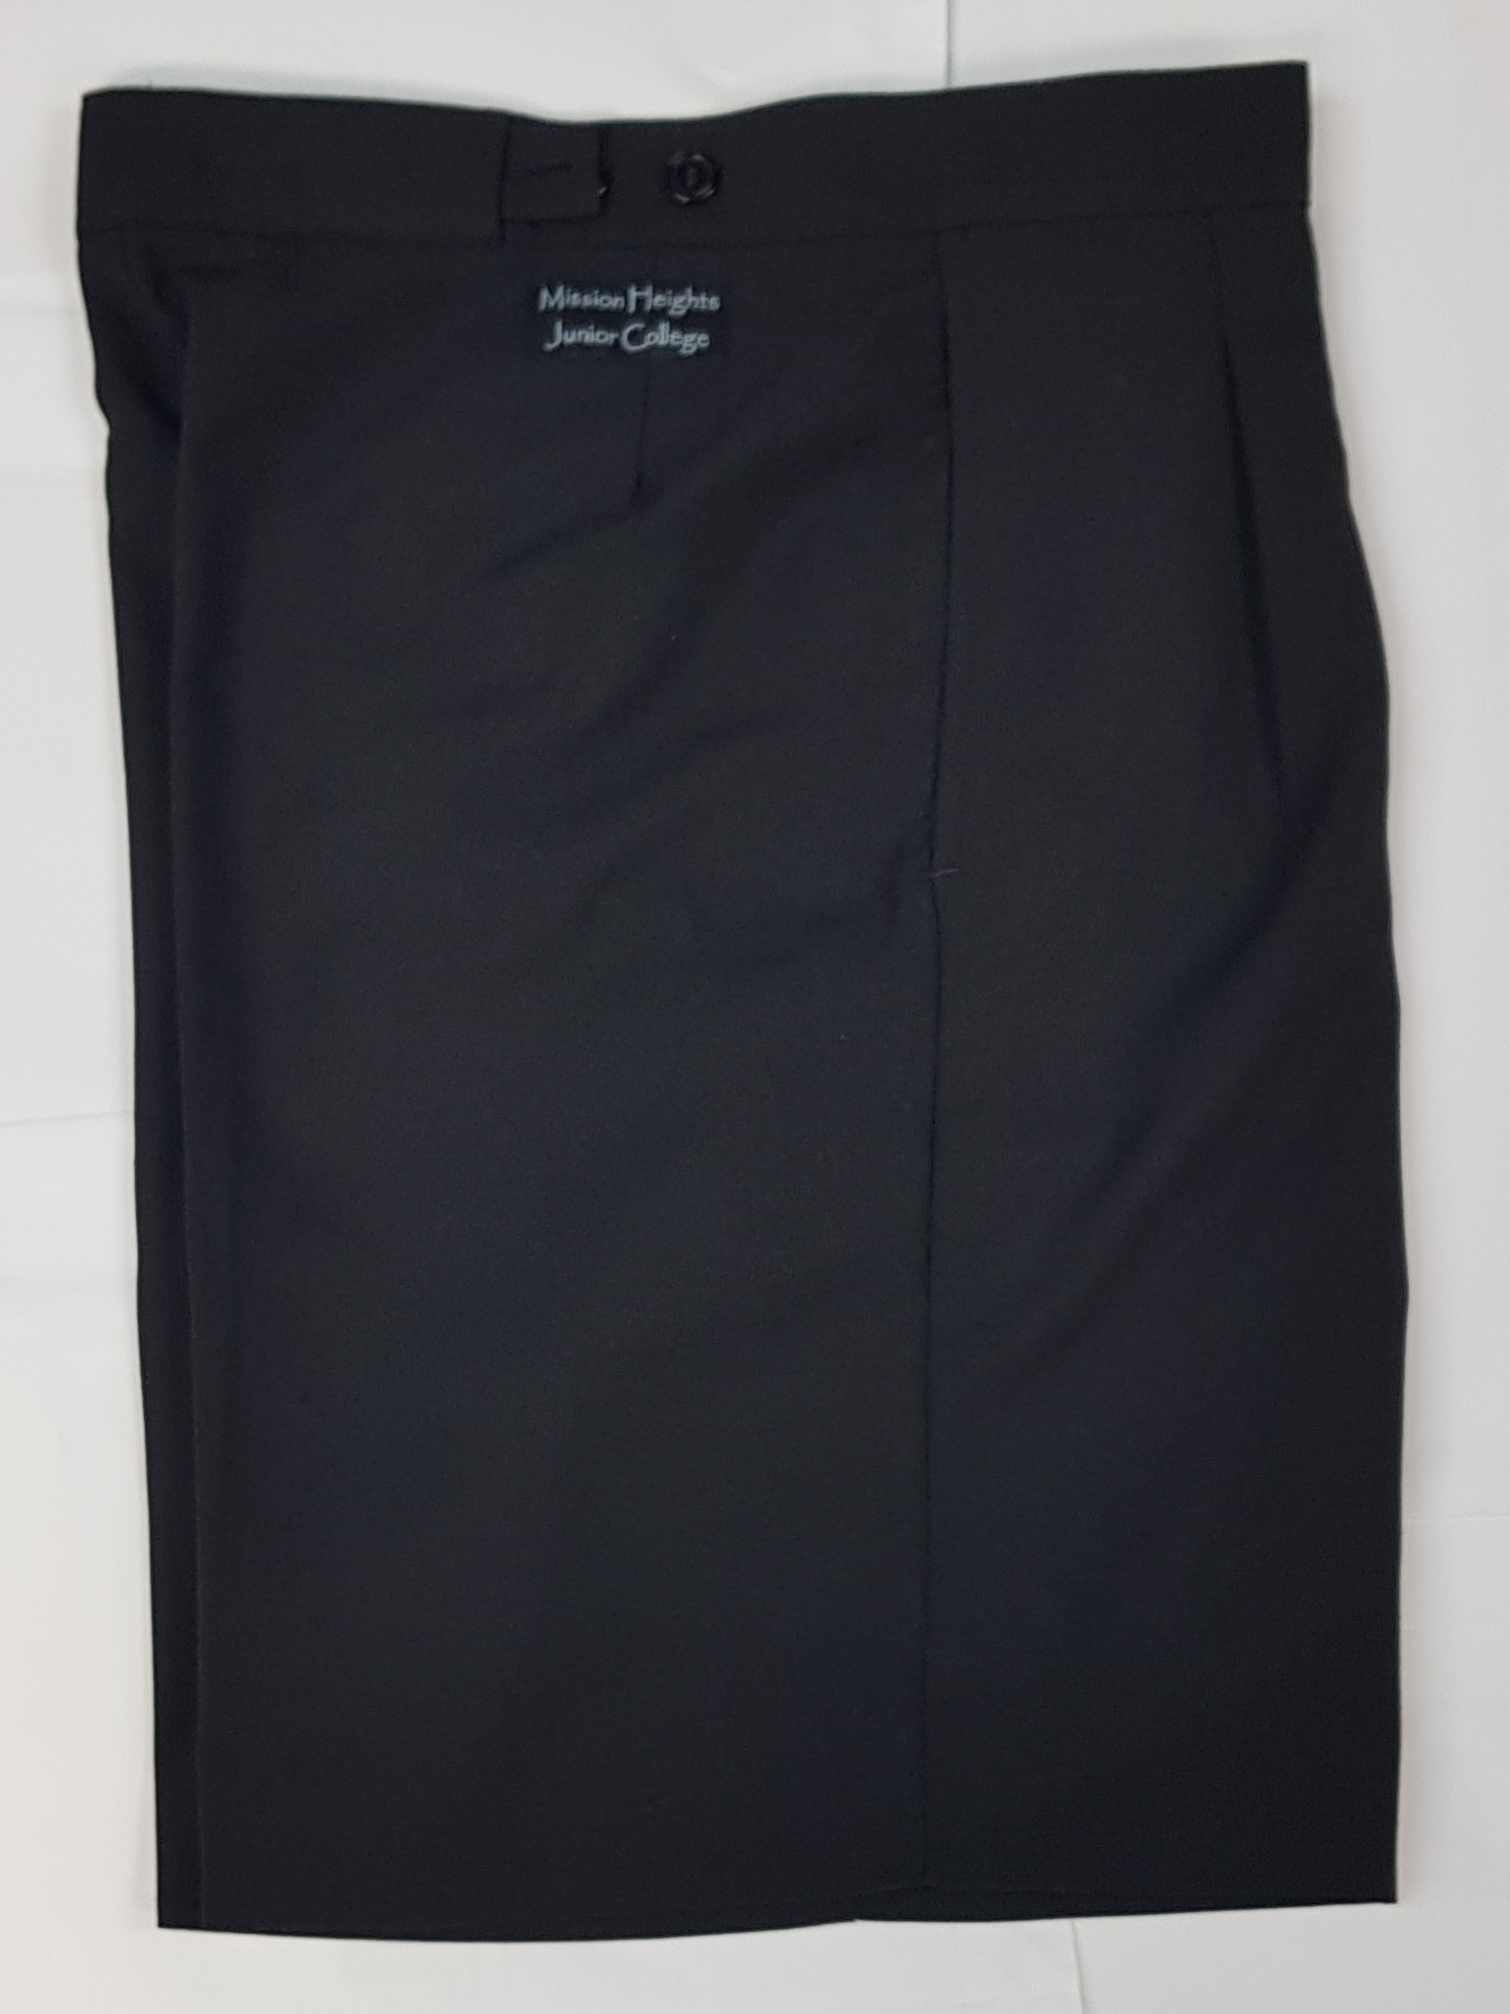 Mission Heights JNR College Girls Shorts - John Russell Schoolwear